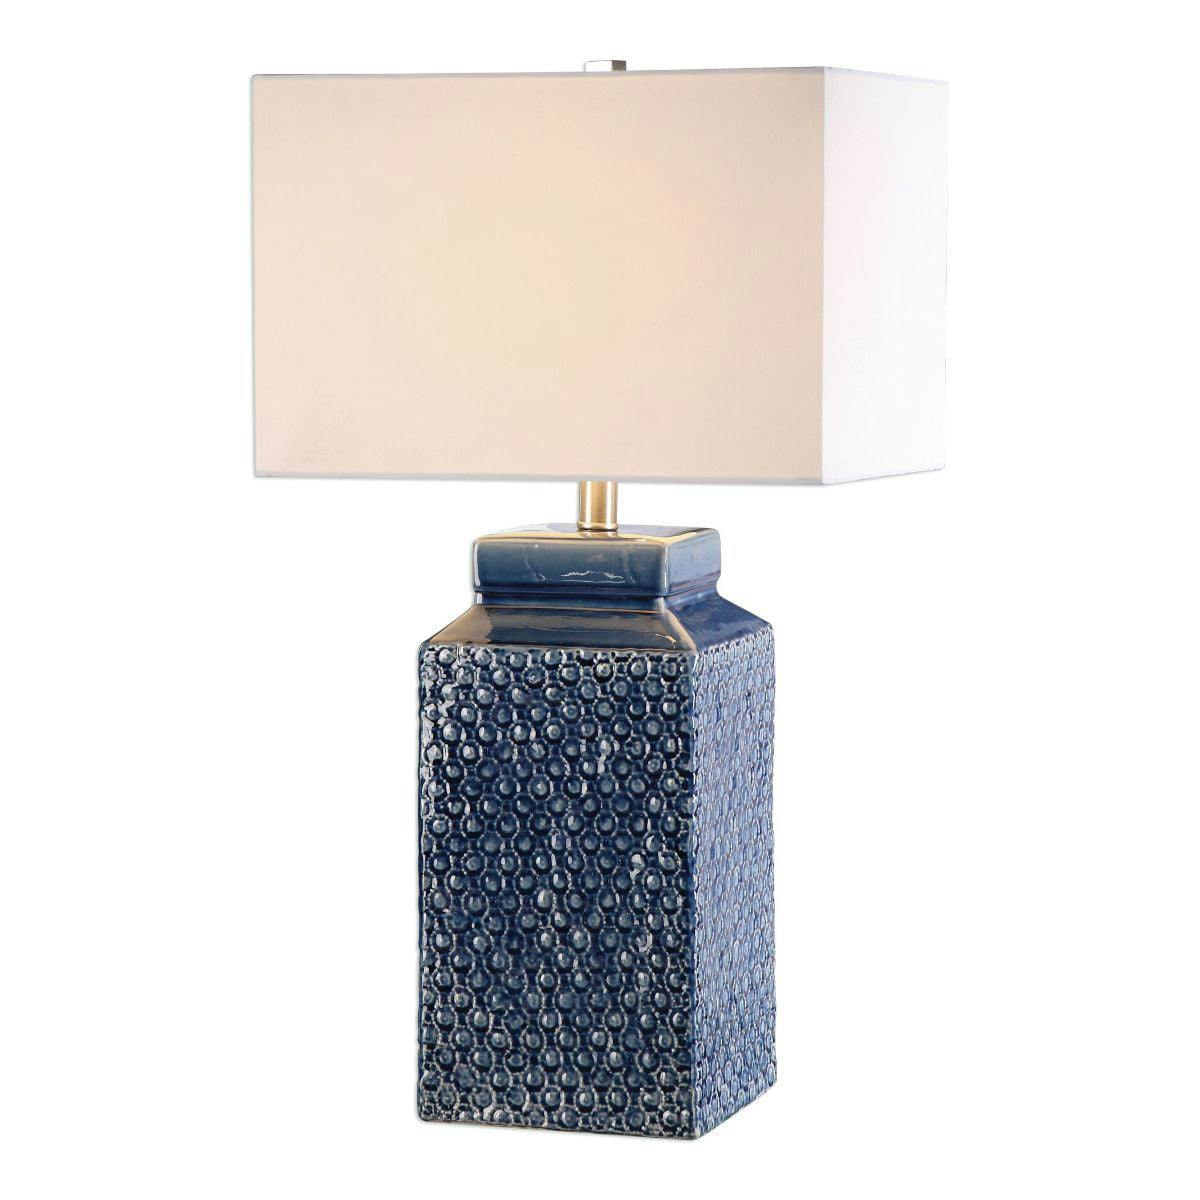 Sapphire Blue Ceramic Table Lamp with White Linen Shade